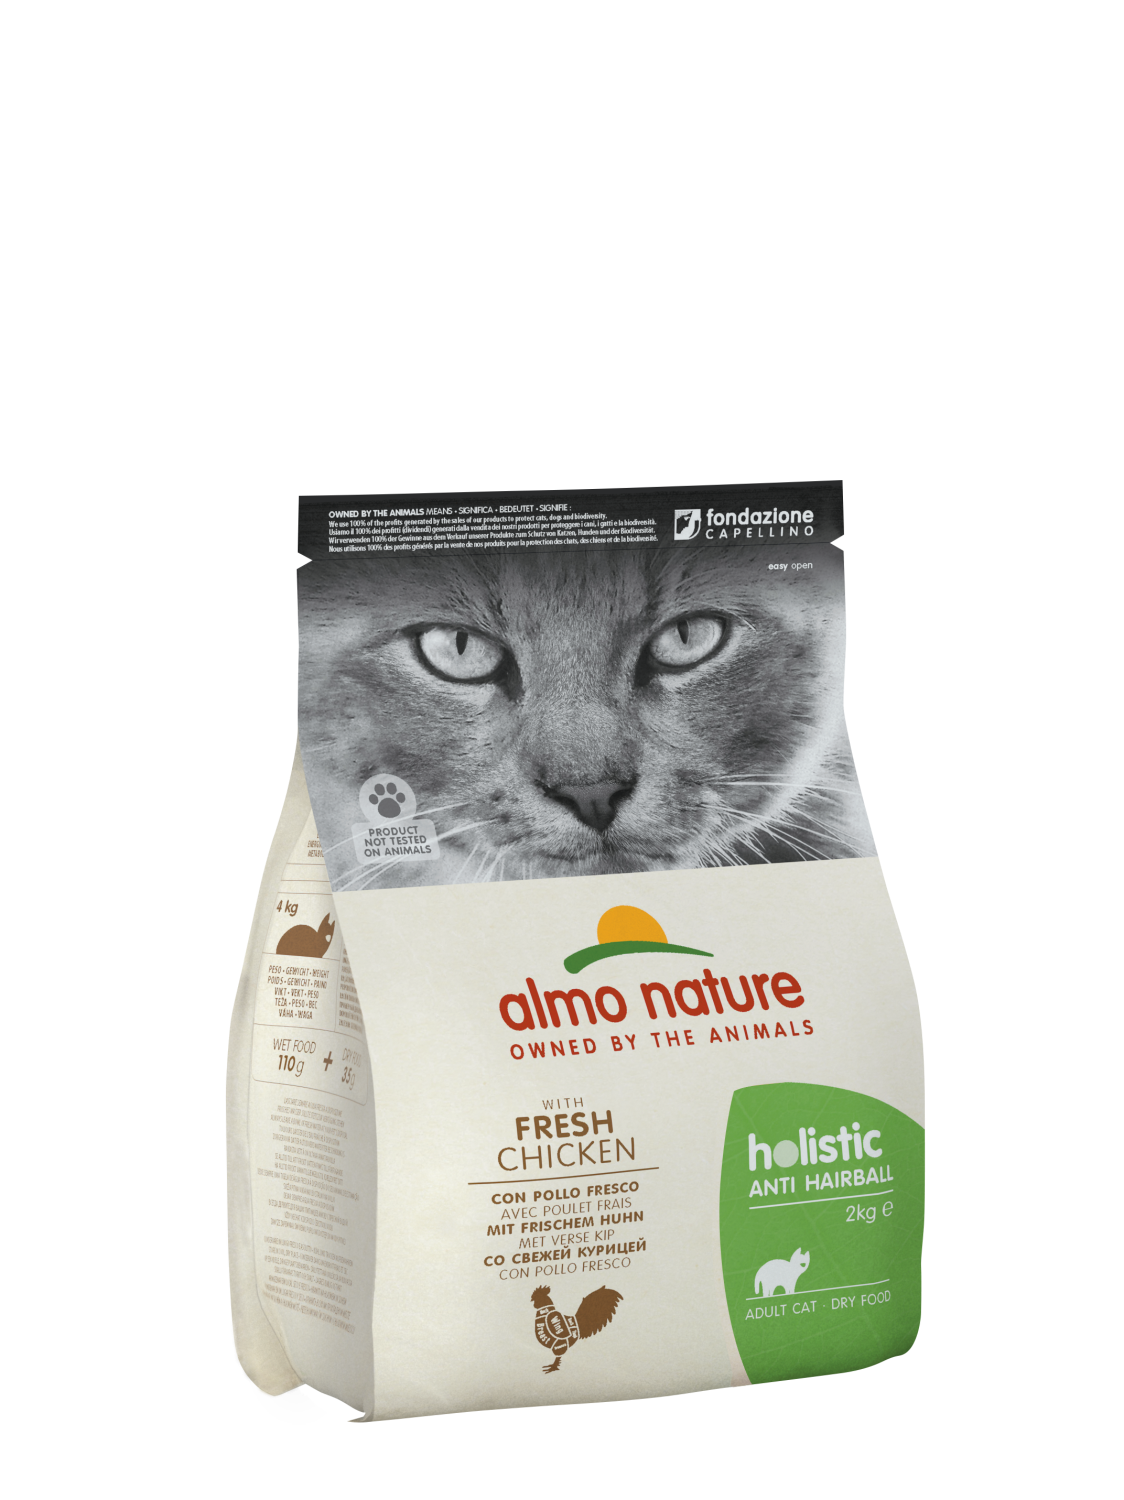 Holistic cat 2kg SAnti-Hairball with Chicken (kylling) Almo Nature (3)